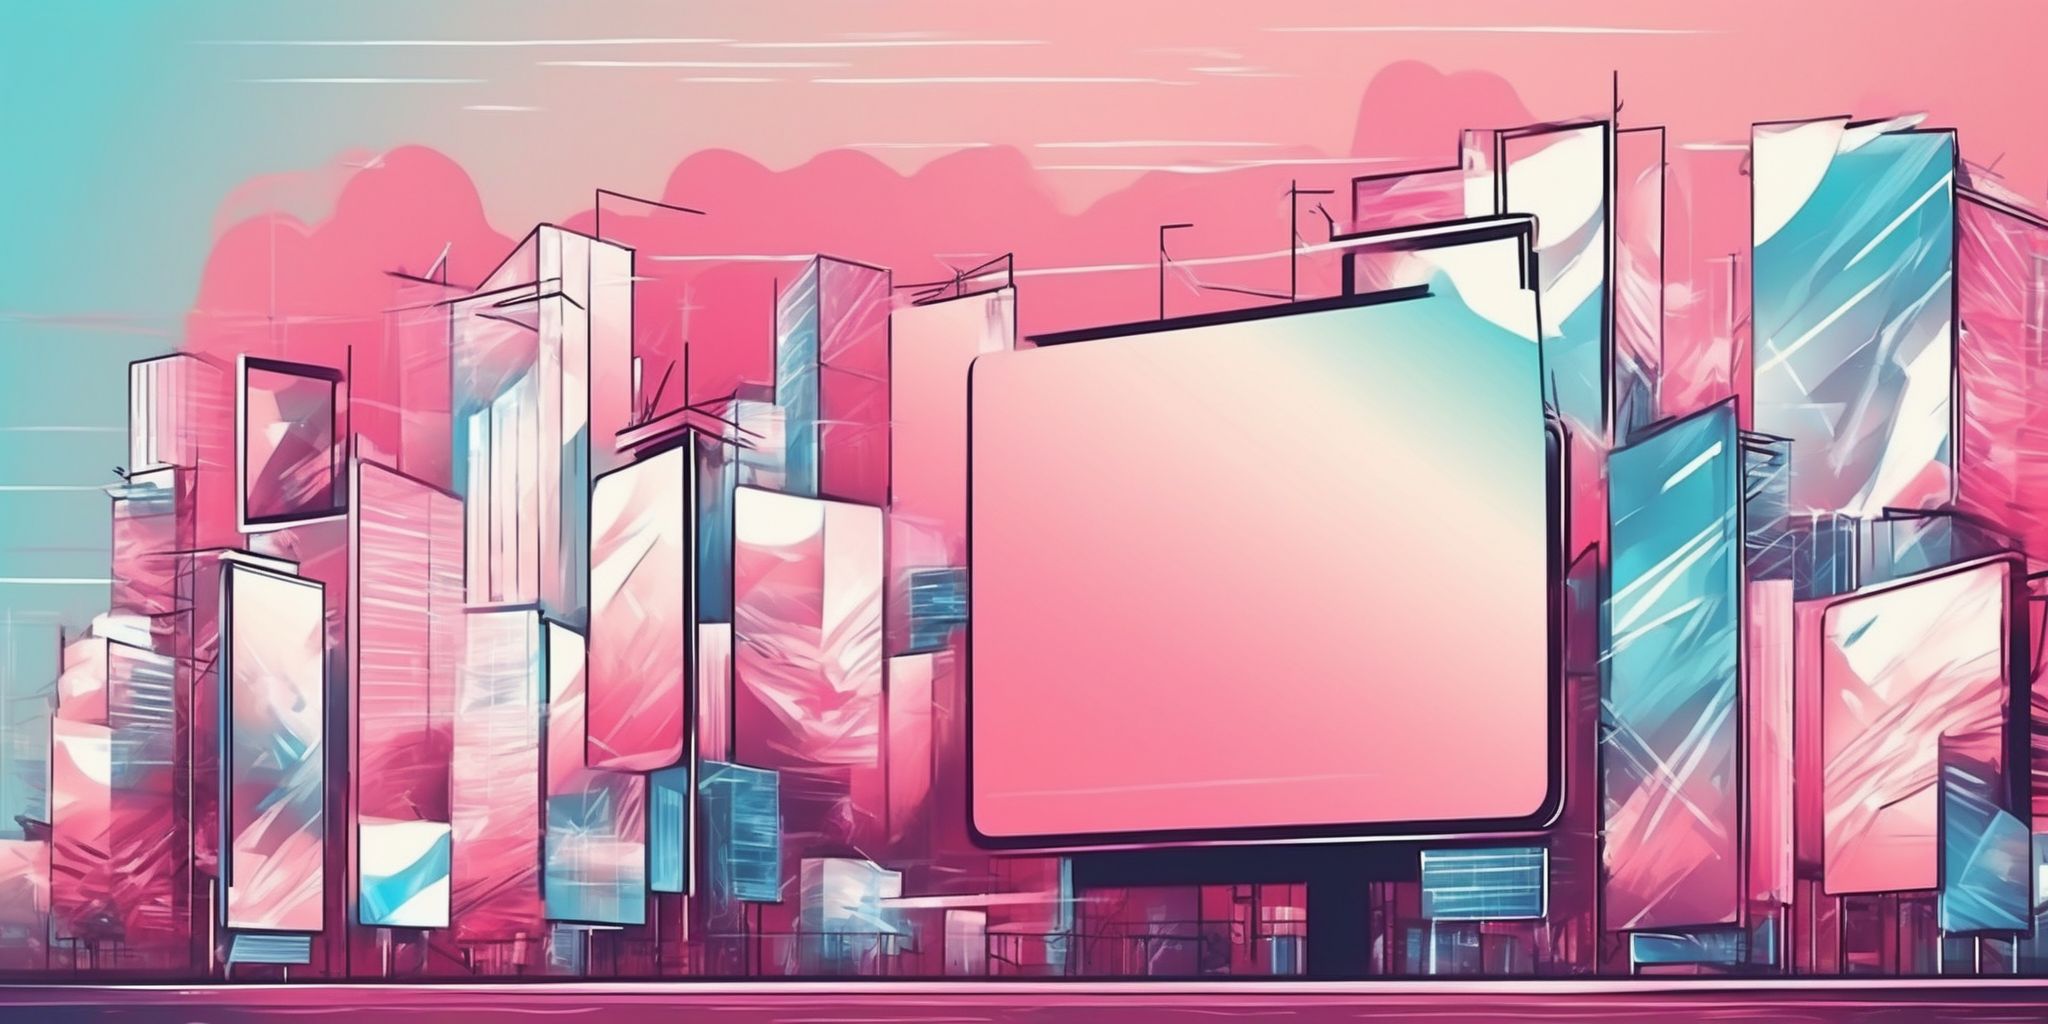 billboard in illustration style with gradients and white background